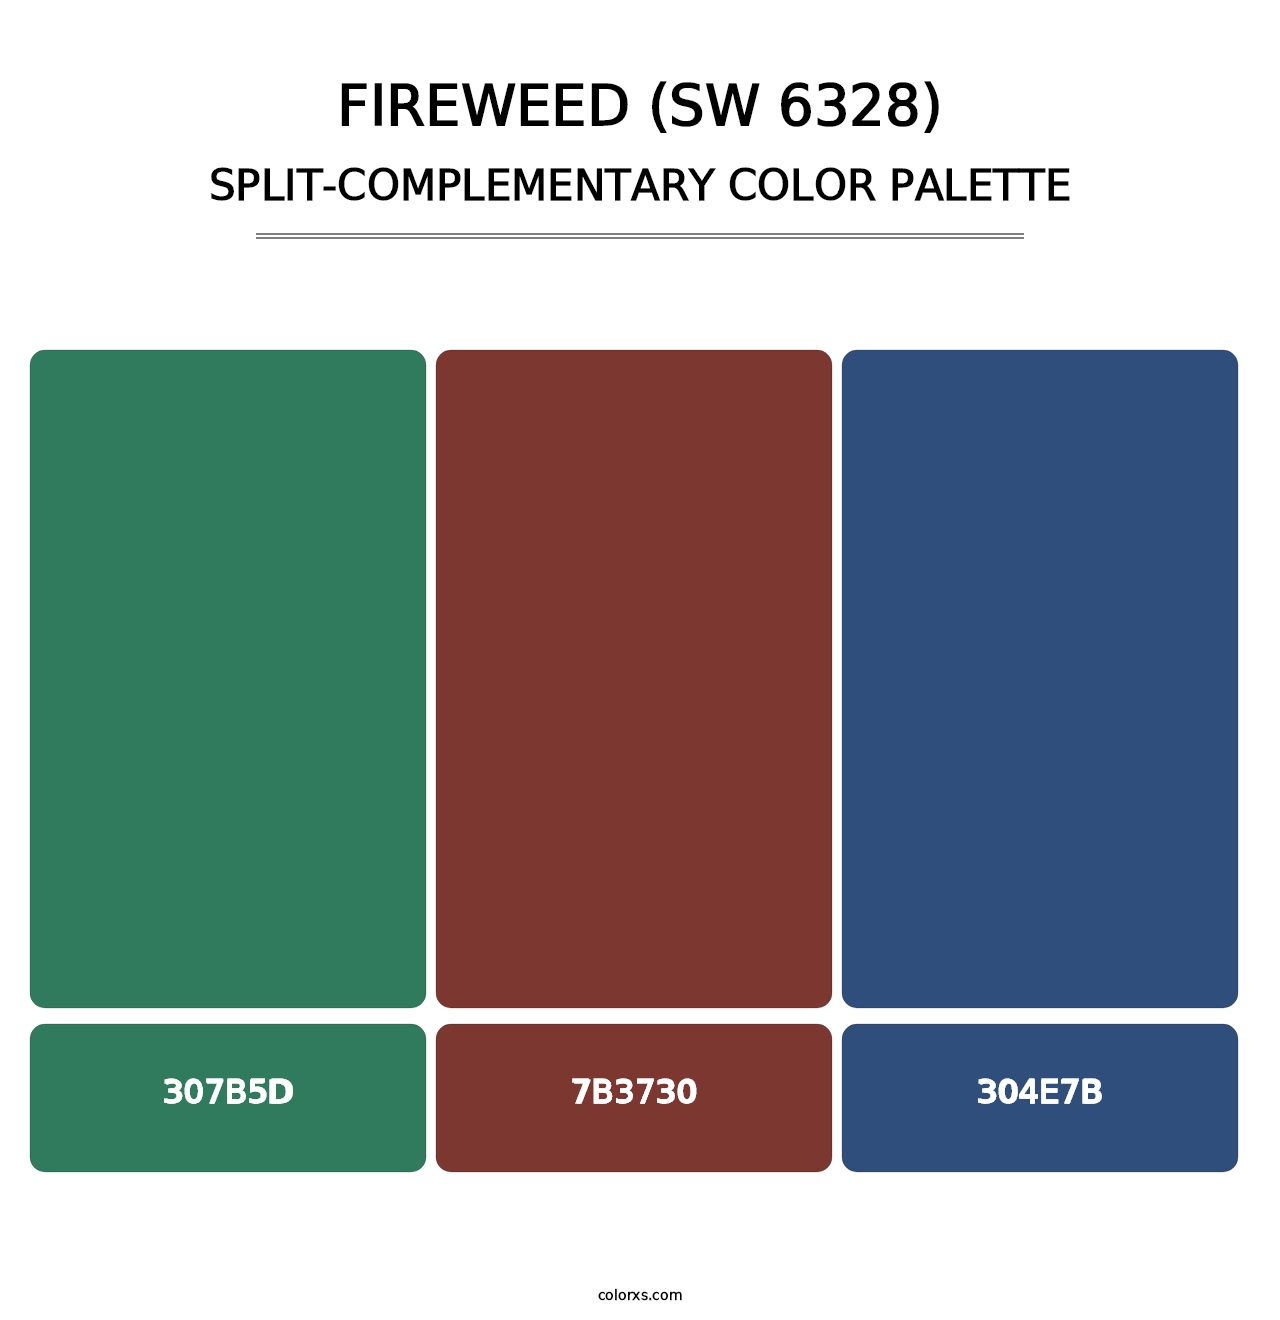 Fireweed (SW 6328) - Split-Complementary Color Palette